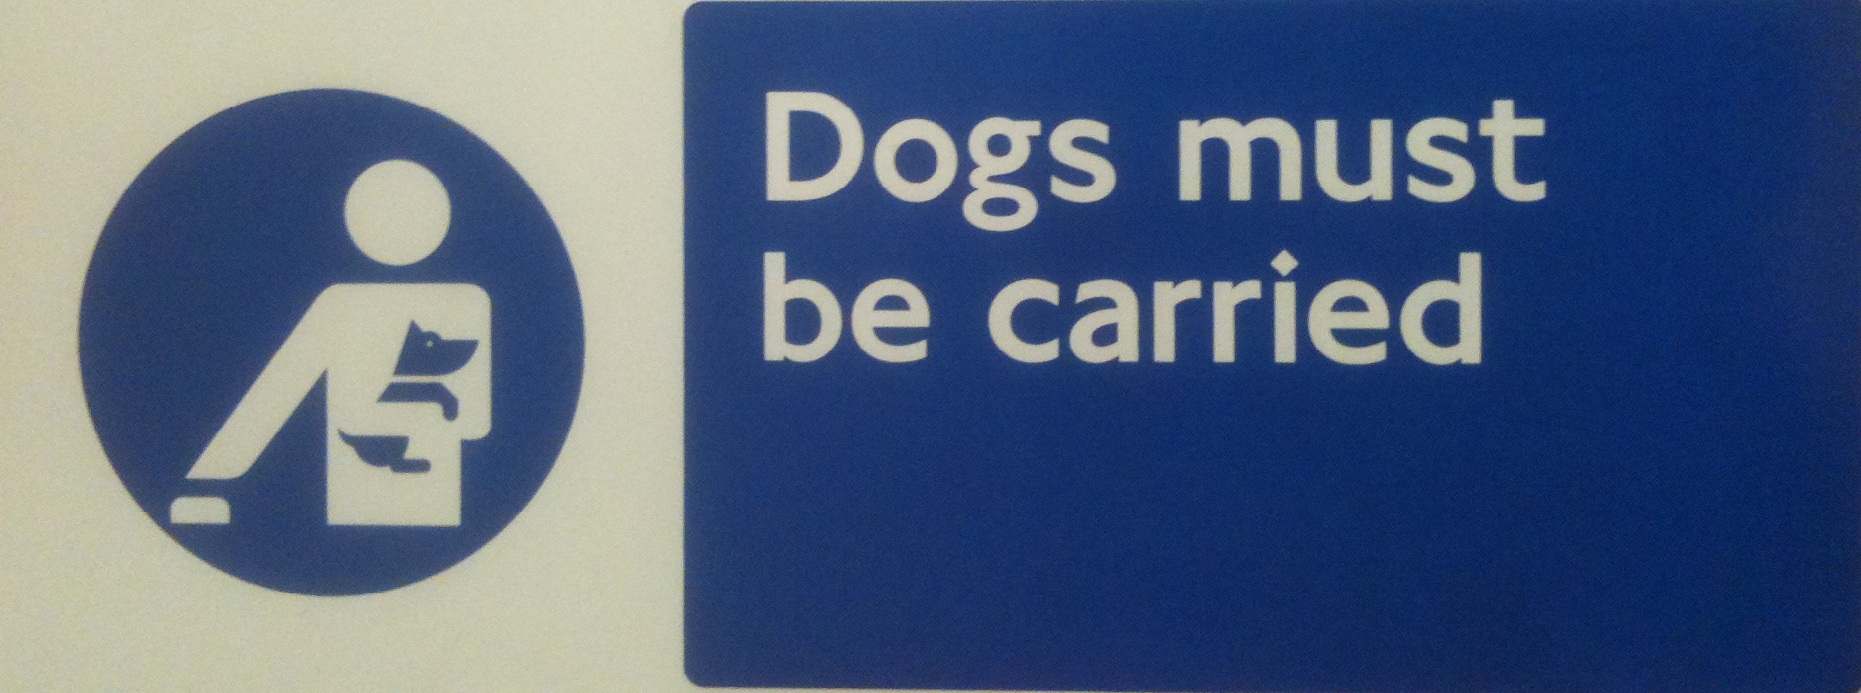 dogs-must-be-carried.jpg